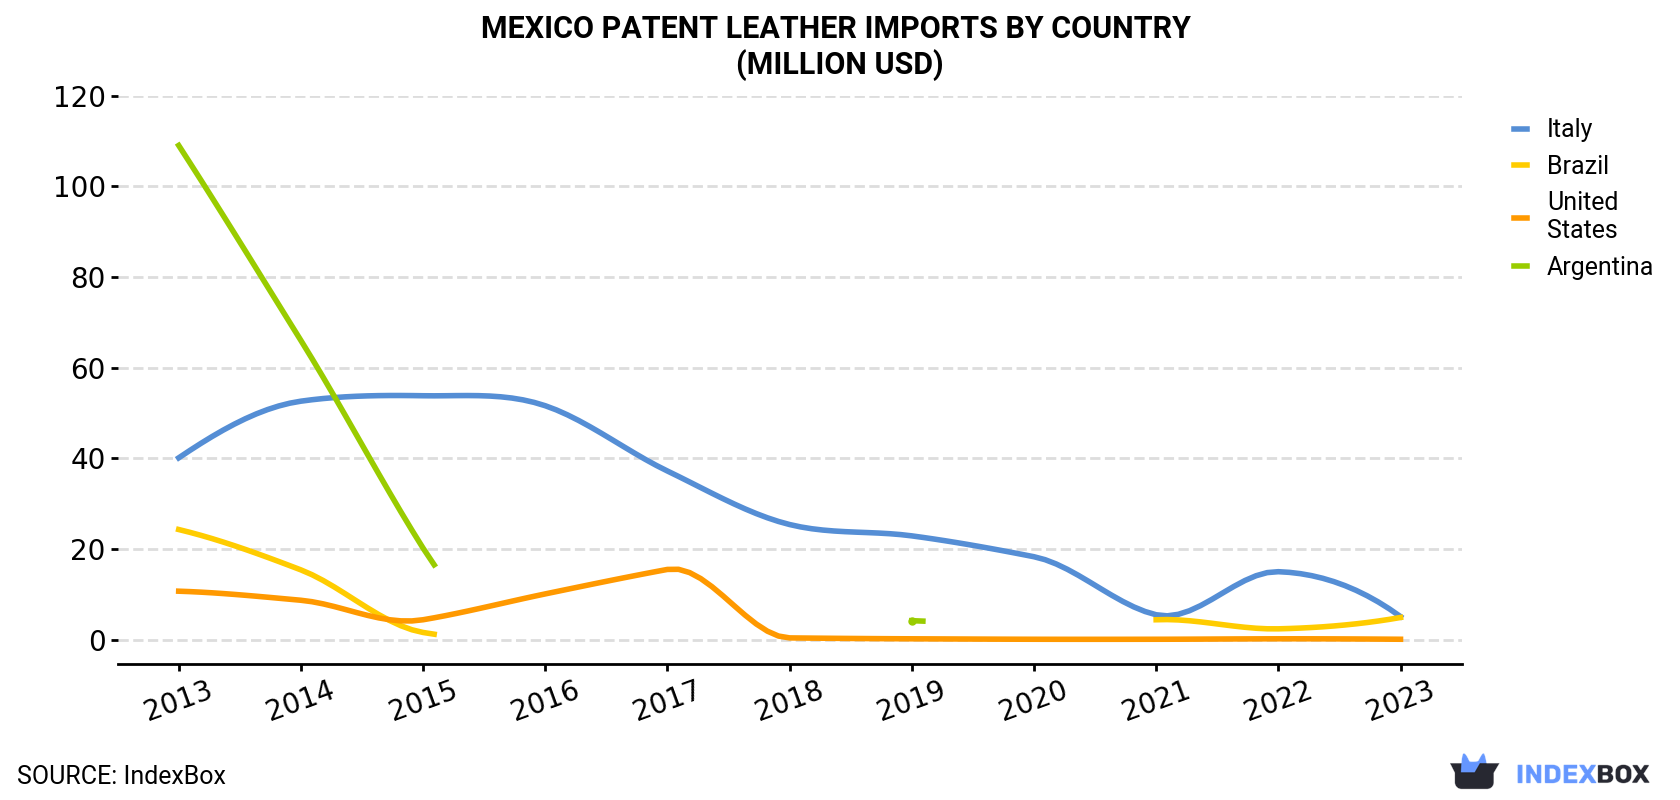 Mexico Patent Leather Imports By Country (Million USD)